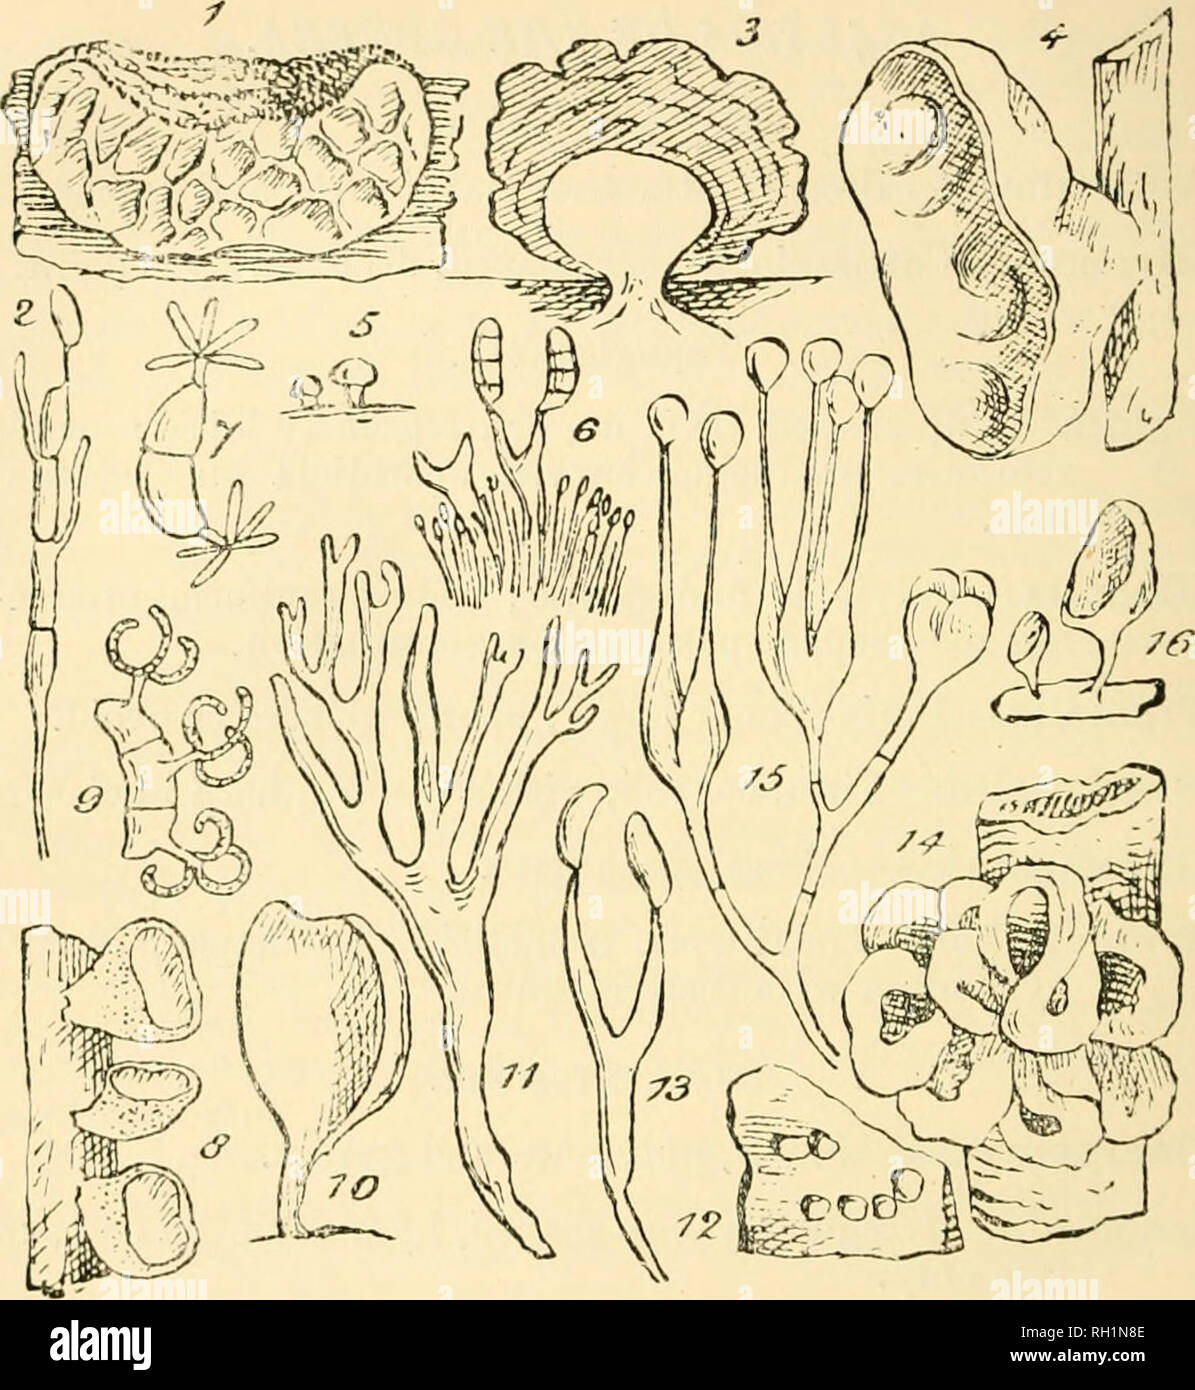 . British fungus-flora. A classified text-book of mycology. Fungi -- Great Britain. 56 FUNGUS-FLORA.. FIGUEES ILLUSTRATING THE TREMELLINEAE. Fig. 1, Aiiricidaria mesentcrica, a small specimen; nat. size;—Fig. 2, basidium and spore of same ; liighly mag.—Fig. 3, Nacmatelia encephala, section of, showing the central nucleus; nat. size;^-Fig. 4, Uirneola anricula-judae, small specimen ; nat. size ;—Fig. 5. Dacryopsin nuda; nat. size;—Fig. G, portion of head of same, showing the densely fasciculate conidiophores with conidia, also basidia bearing three septata basidia sjjores; higldy mag.;—Fig. 7, Stock Photo